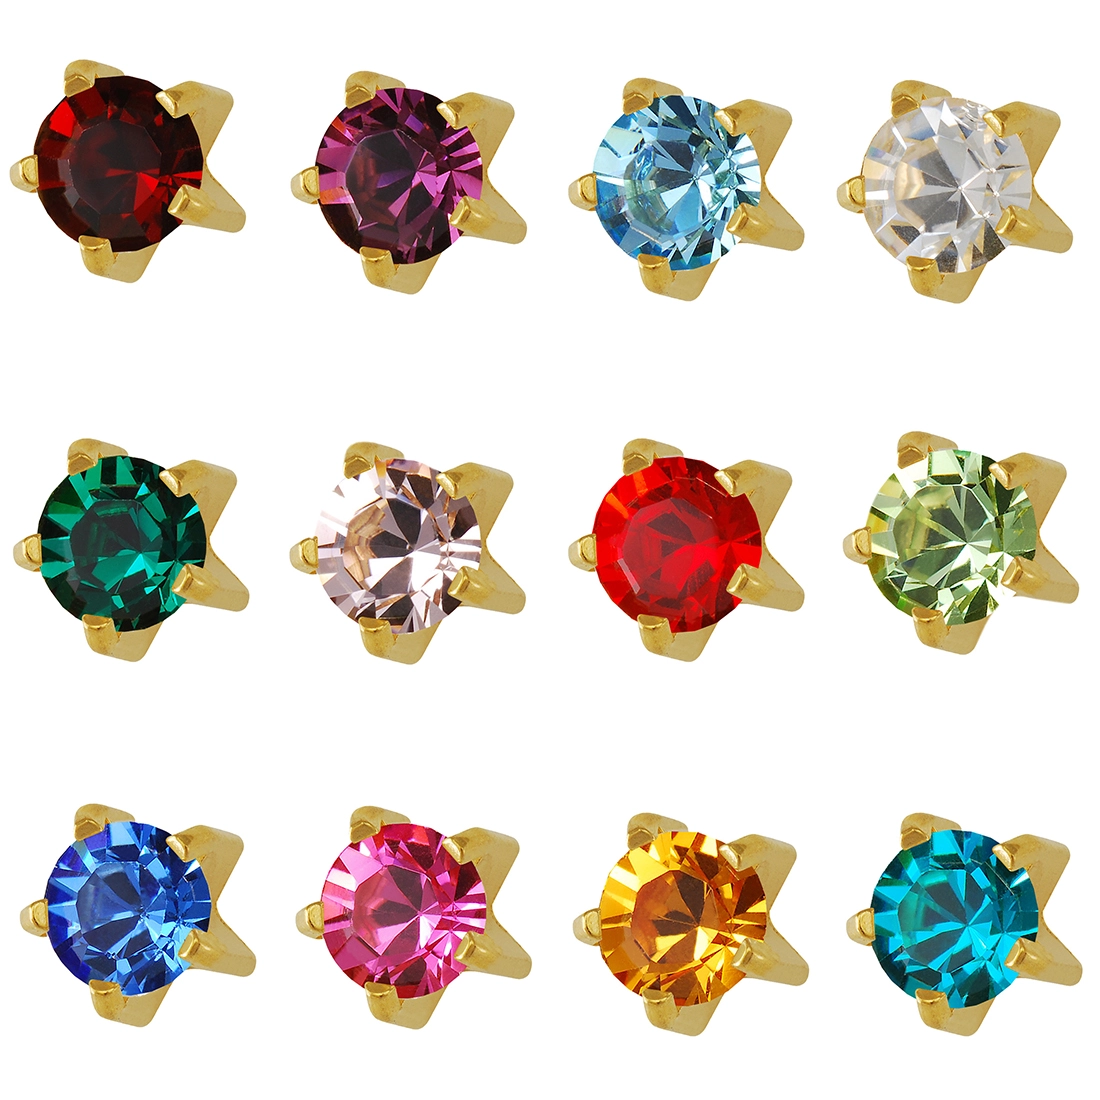 2MM Star – Assorted (Multi-color) | January - December Birthstone | 24K Pure Gold Plated Piercing Earrings | Studex Universal Machine (12 Pair Kit)